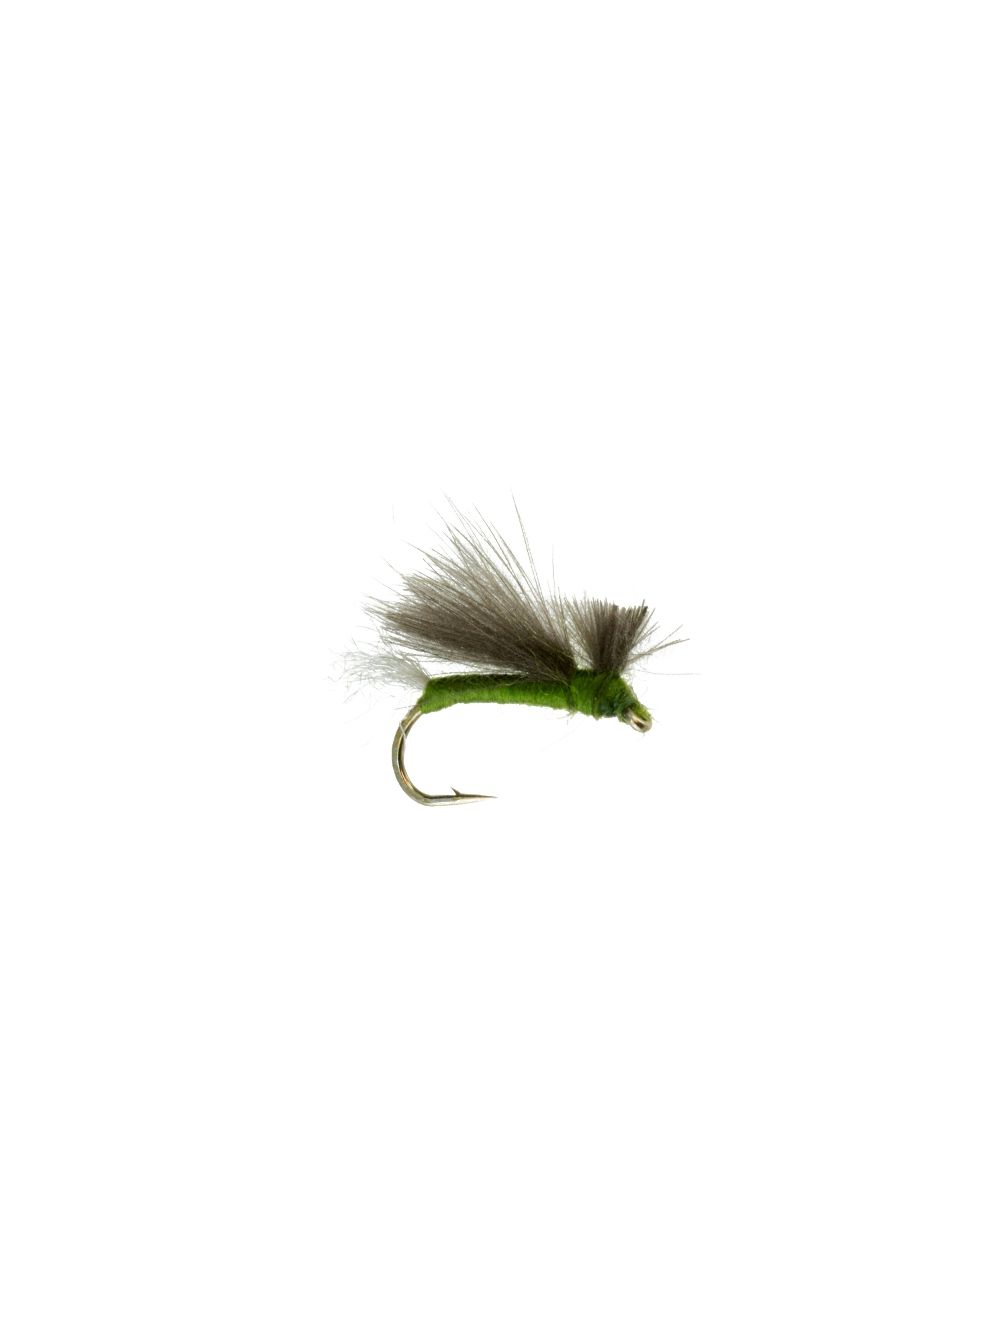 CDC CADDIS OLIVE .DRY TROUT&GRAYLING FLY FISHING FLIES SIEZ 14/12/10 